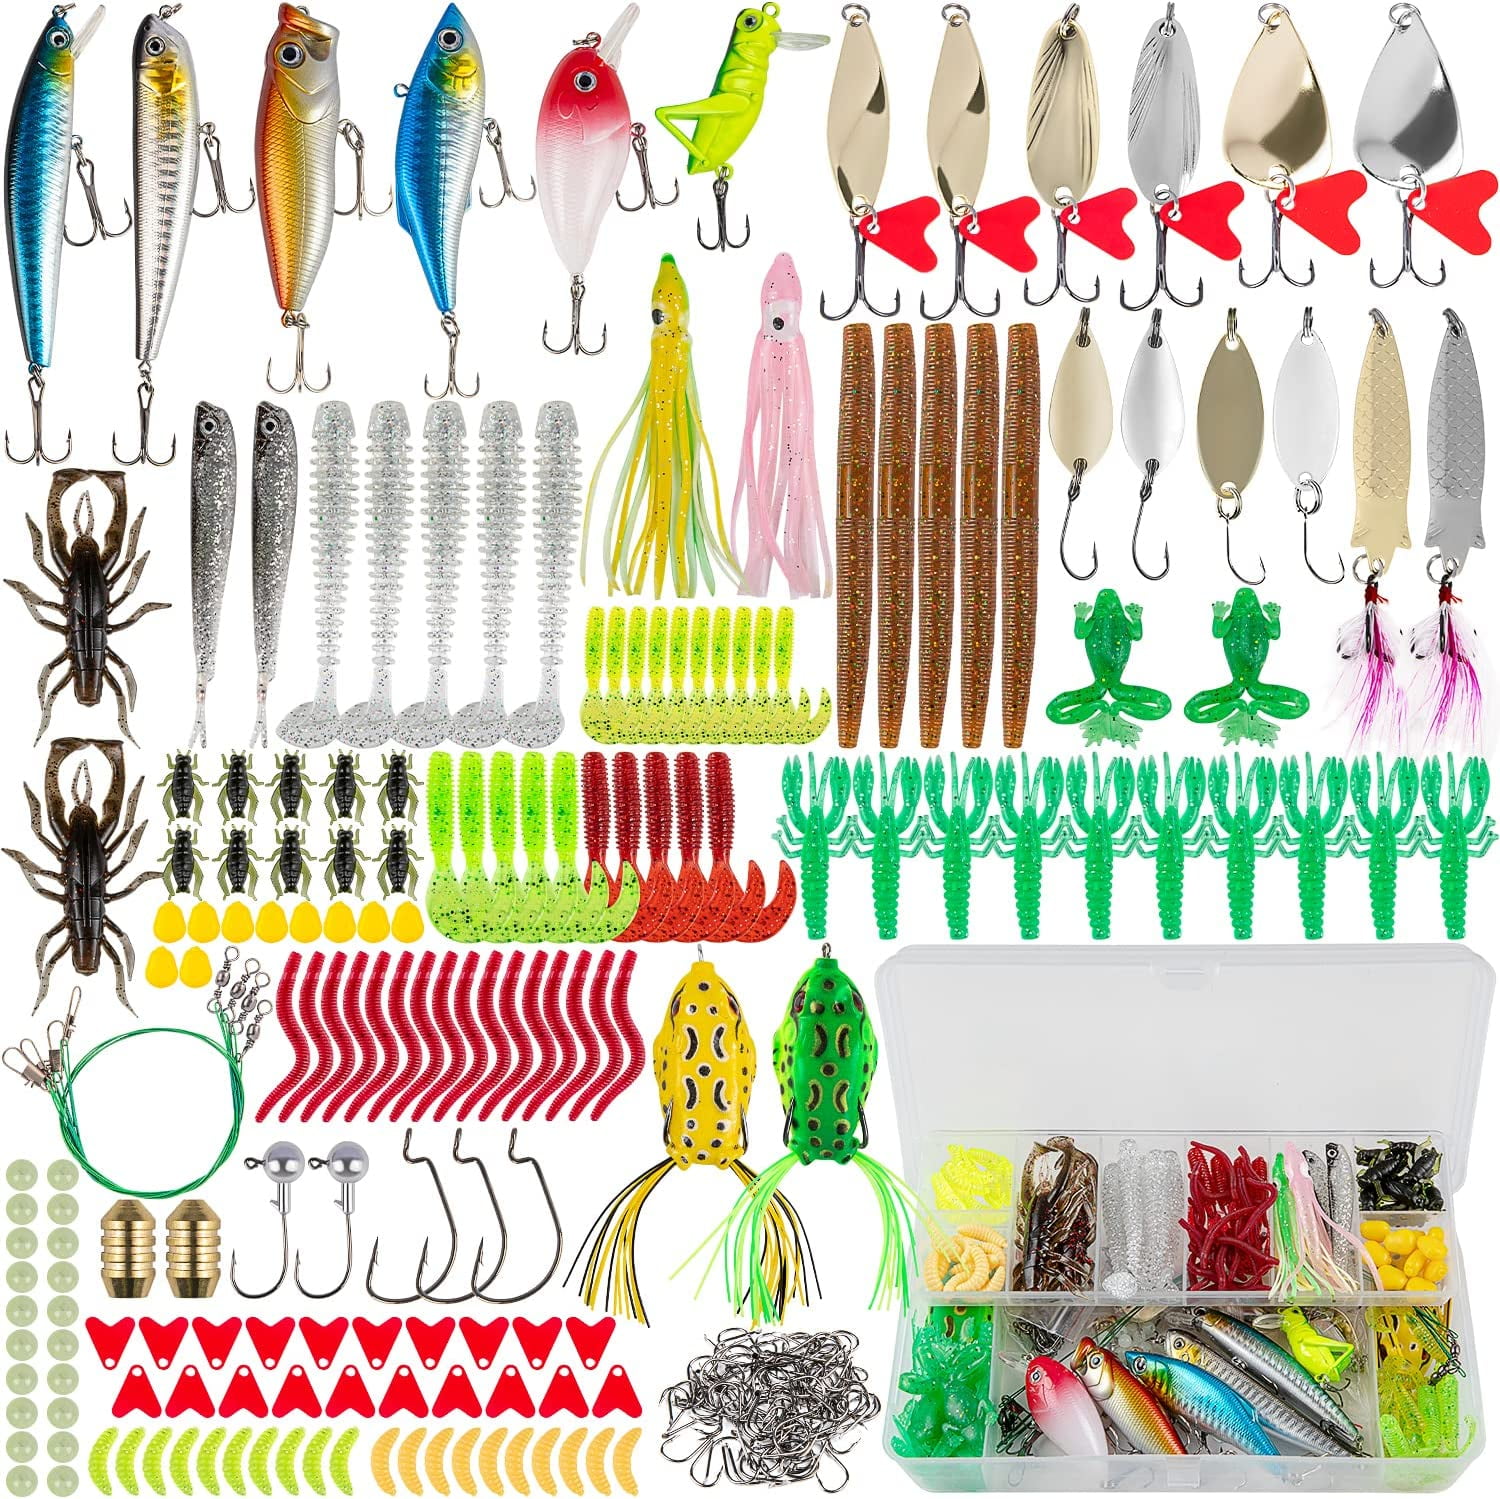 GOANDO Fishing Lures 380Pcs Fishing Gear for Bass Trout Salmon Fishing Kit  Tackle Box with Plugs Jigs Crankbaits Spoon Poppers Soft Plastics Worms and  More Fishing Accessories Fishing Gifts for Men 